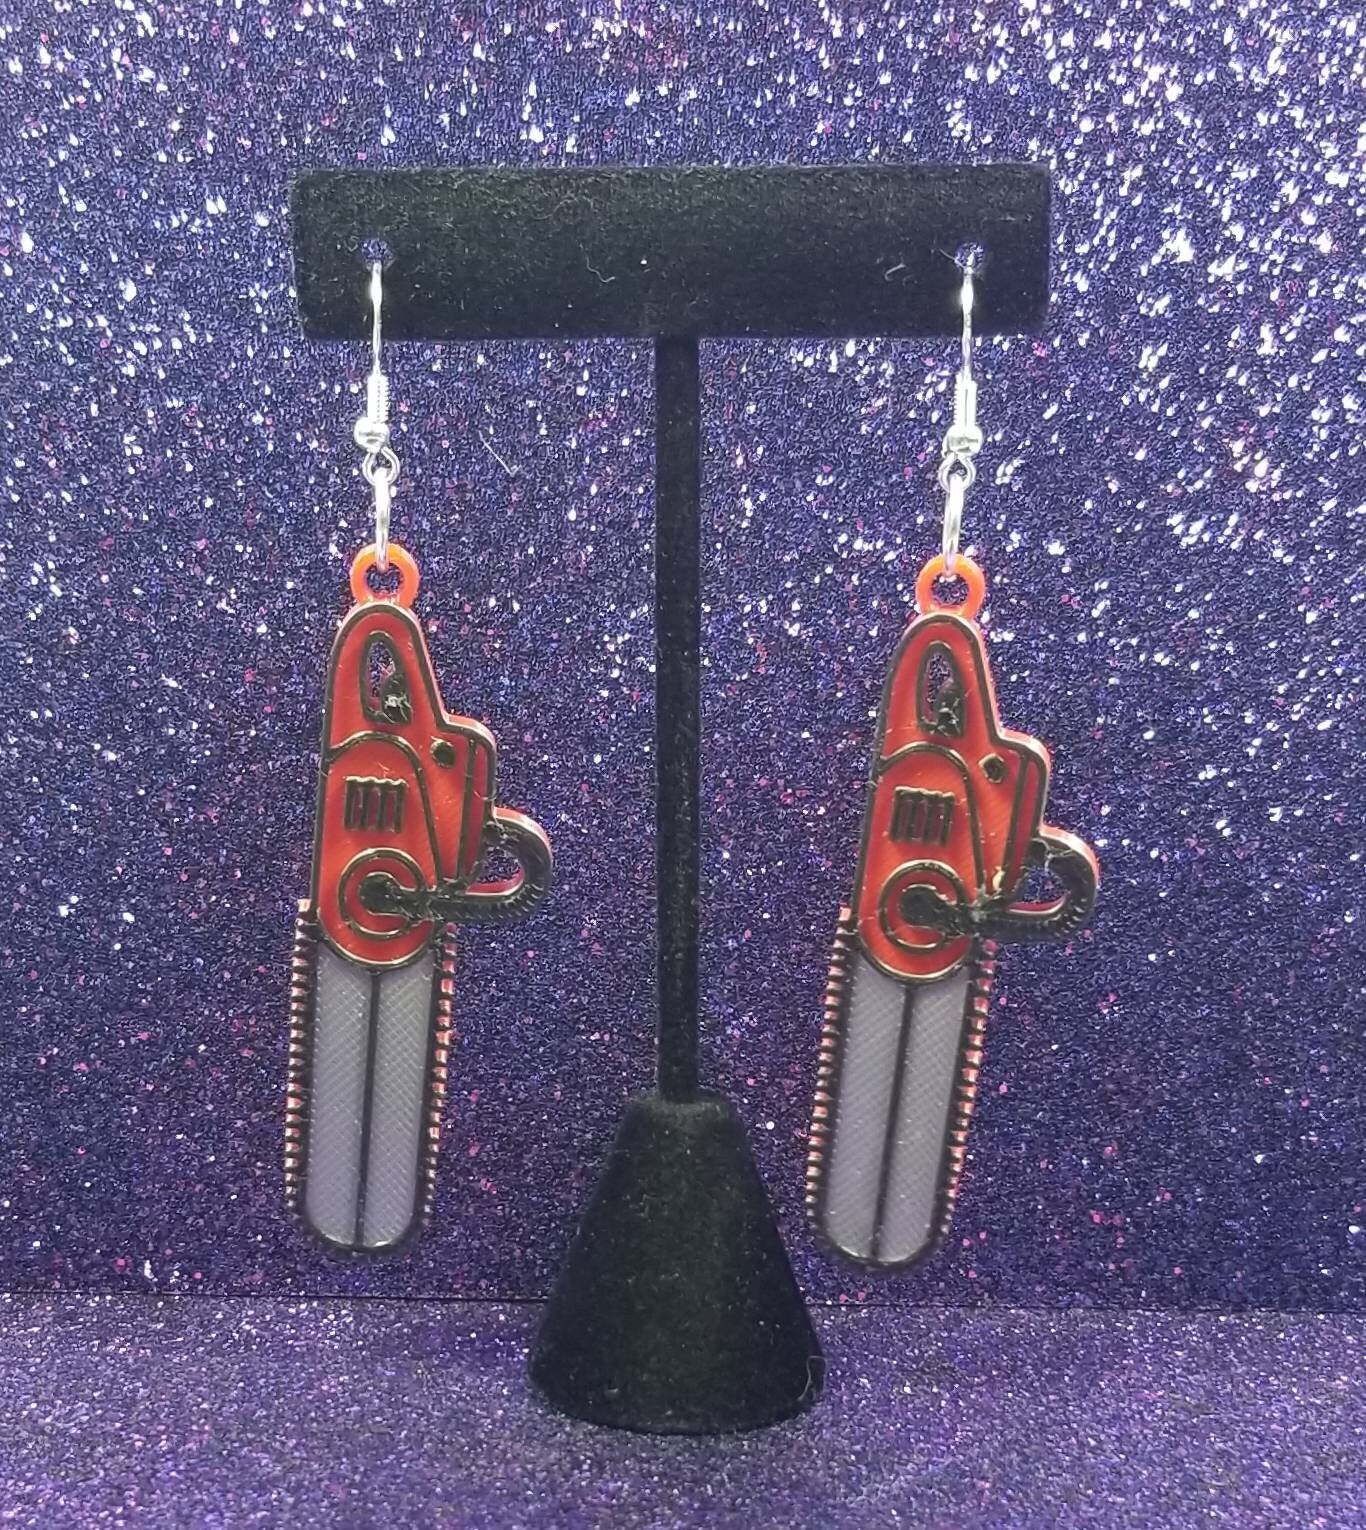 Groovy Chainsaw Statement Earrings 3D Printed